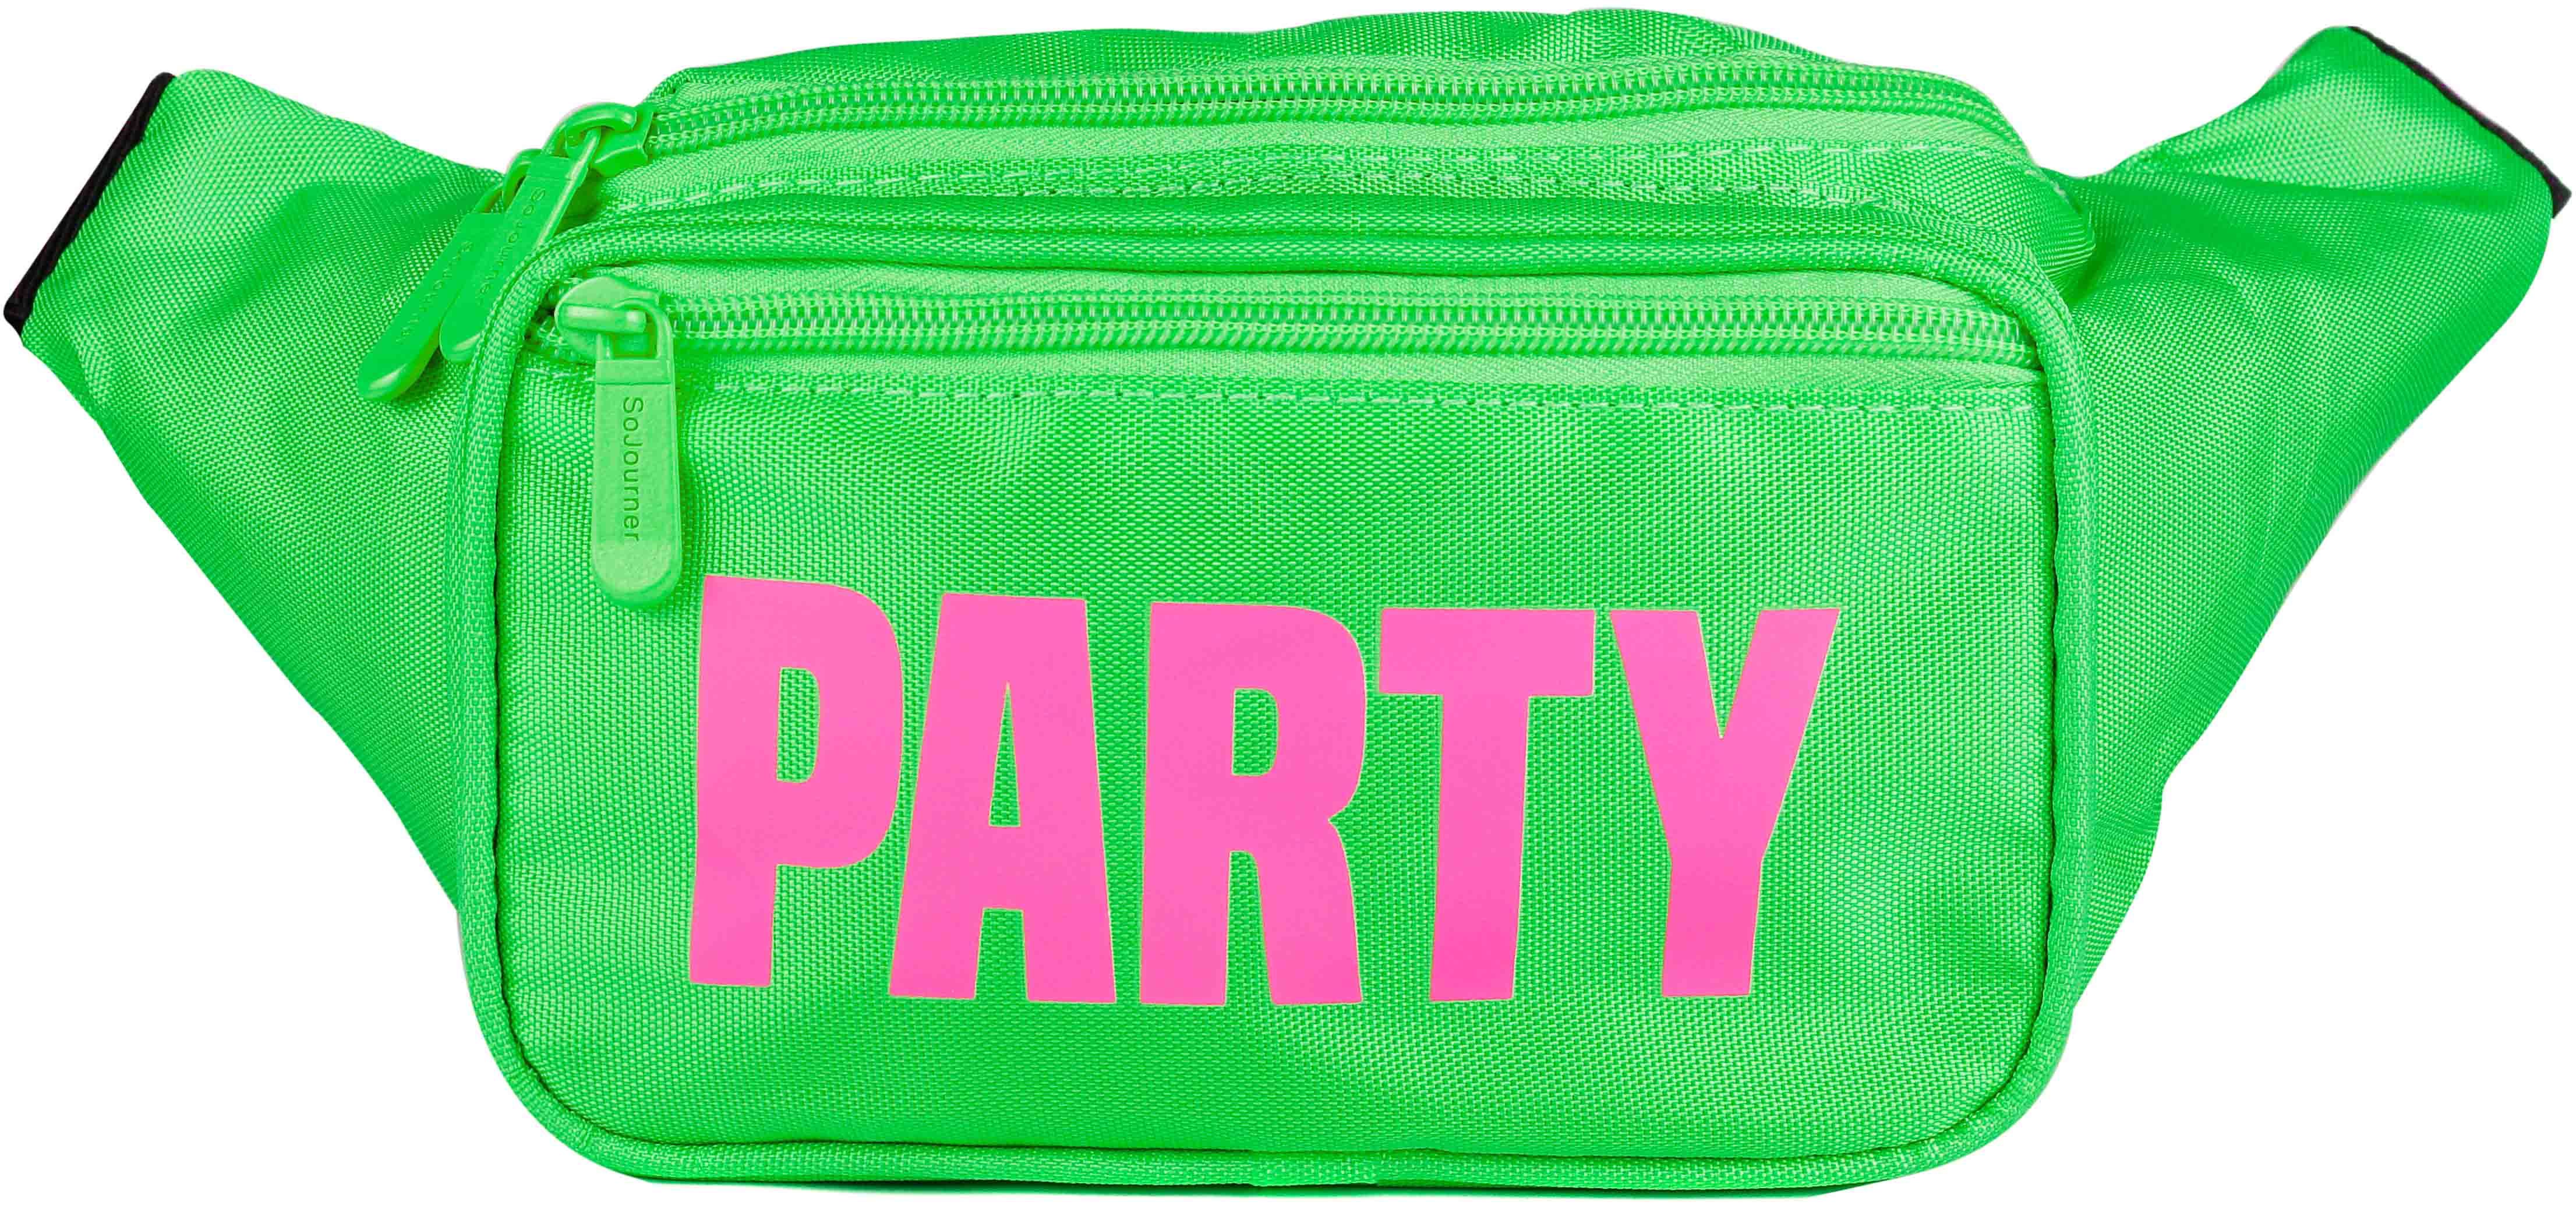 Green Neon Party Fanny Pack | SoJourner Bags